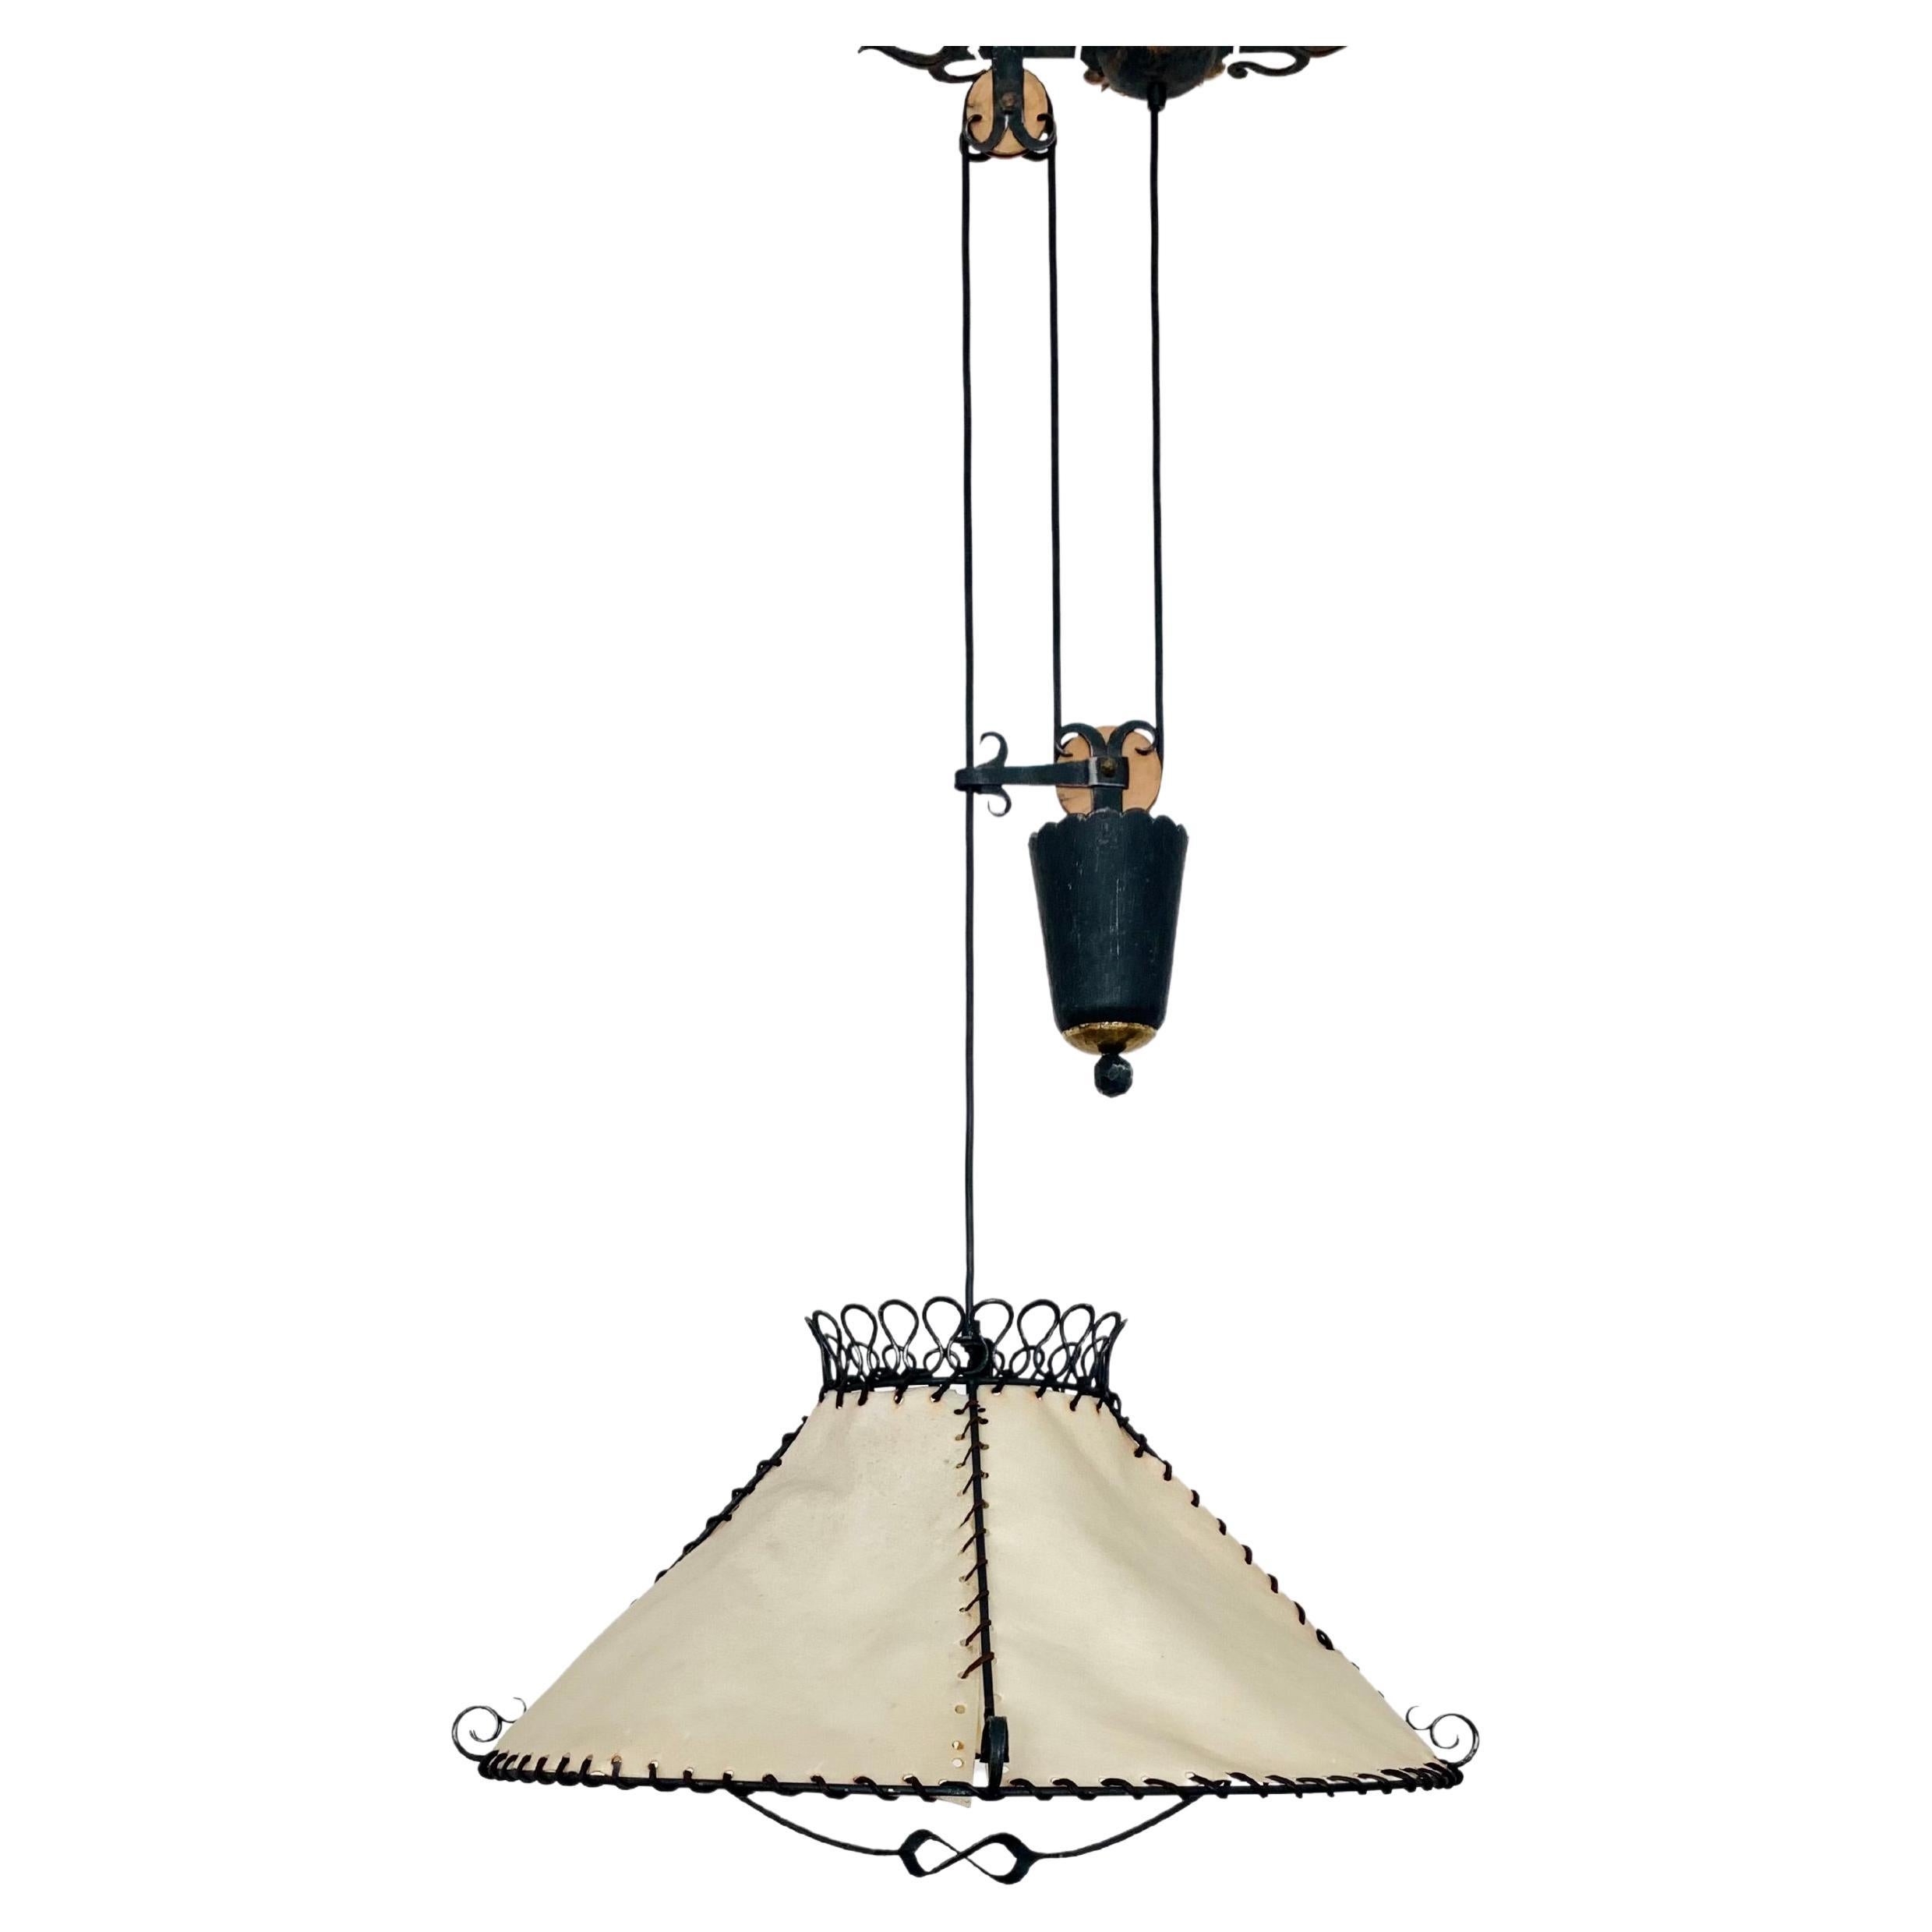 Adjustable Iron Pendant Lamp with Counterweight For Sale